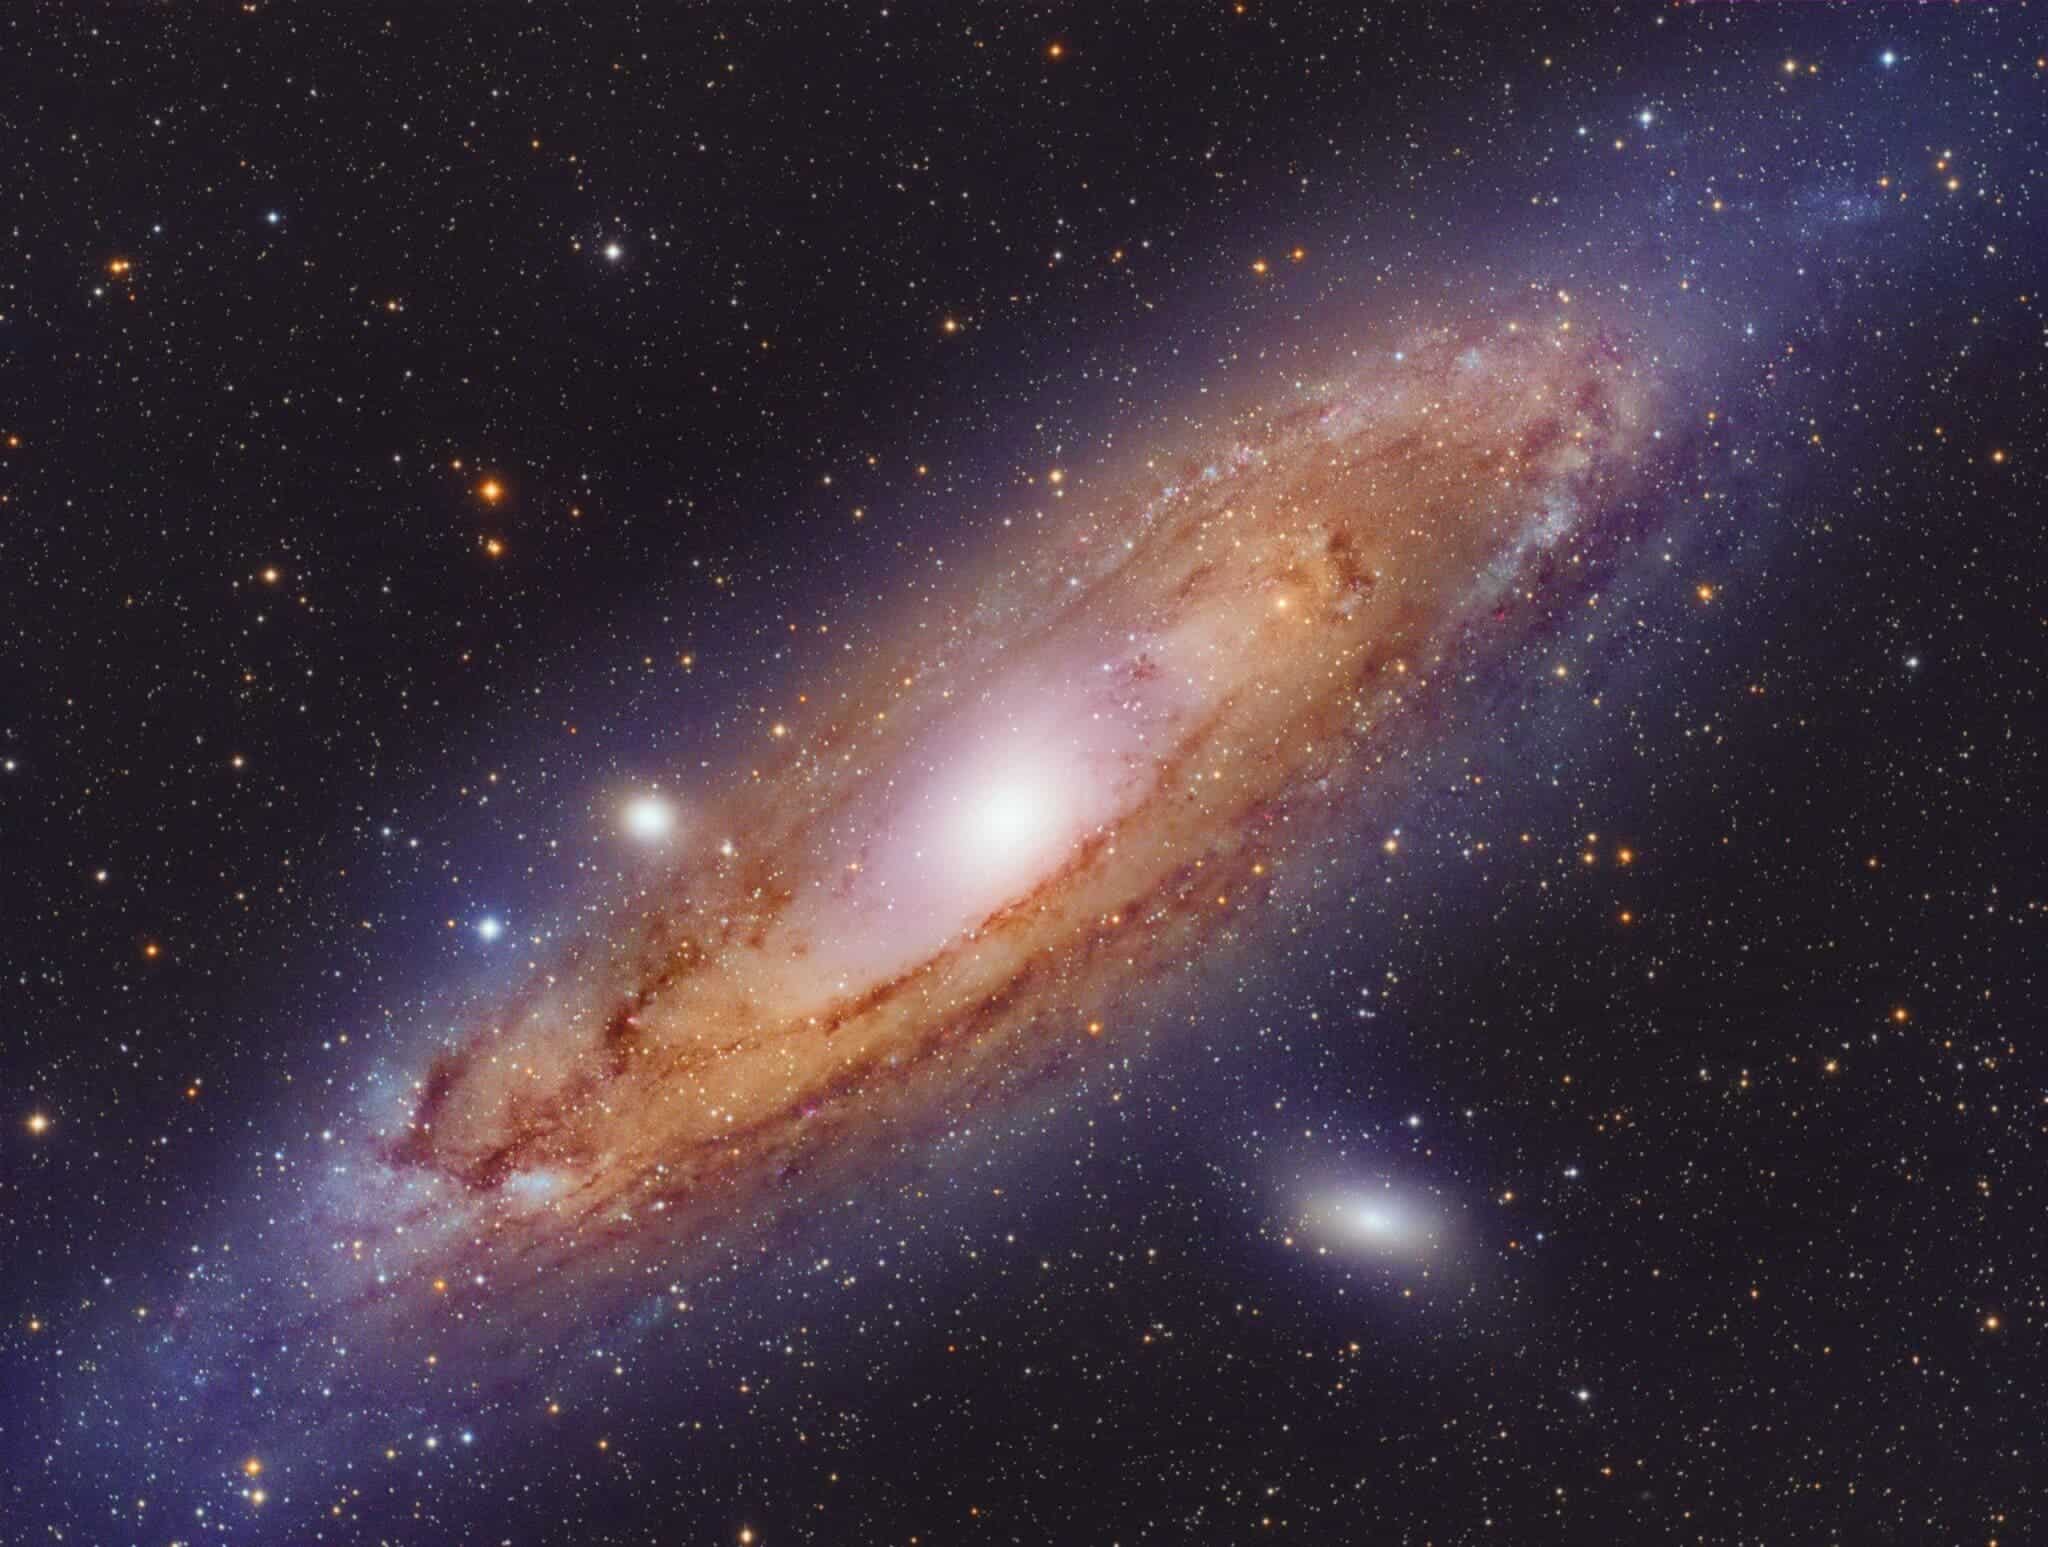 The merging of Milky Way and Andromeda’s supermassive black holes